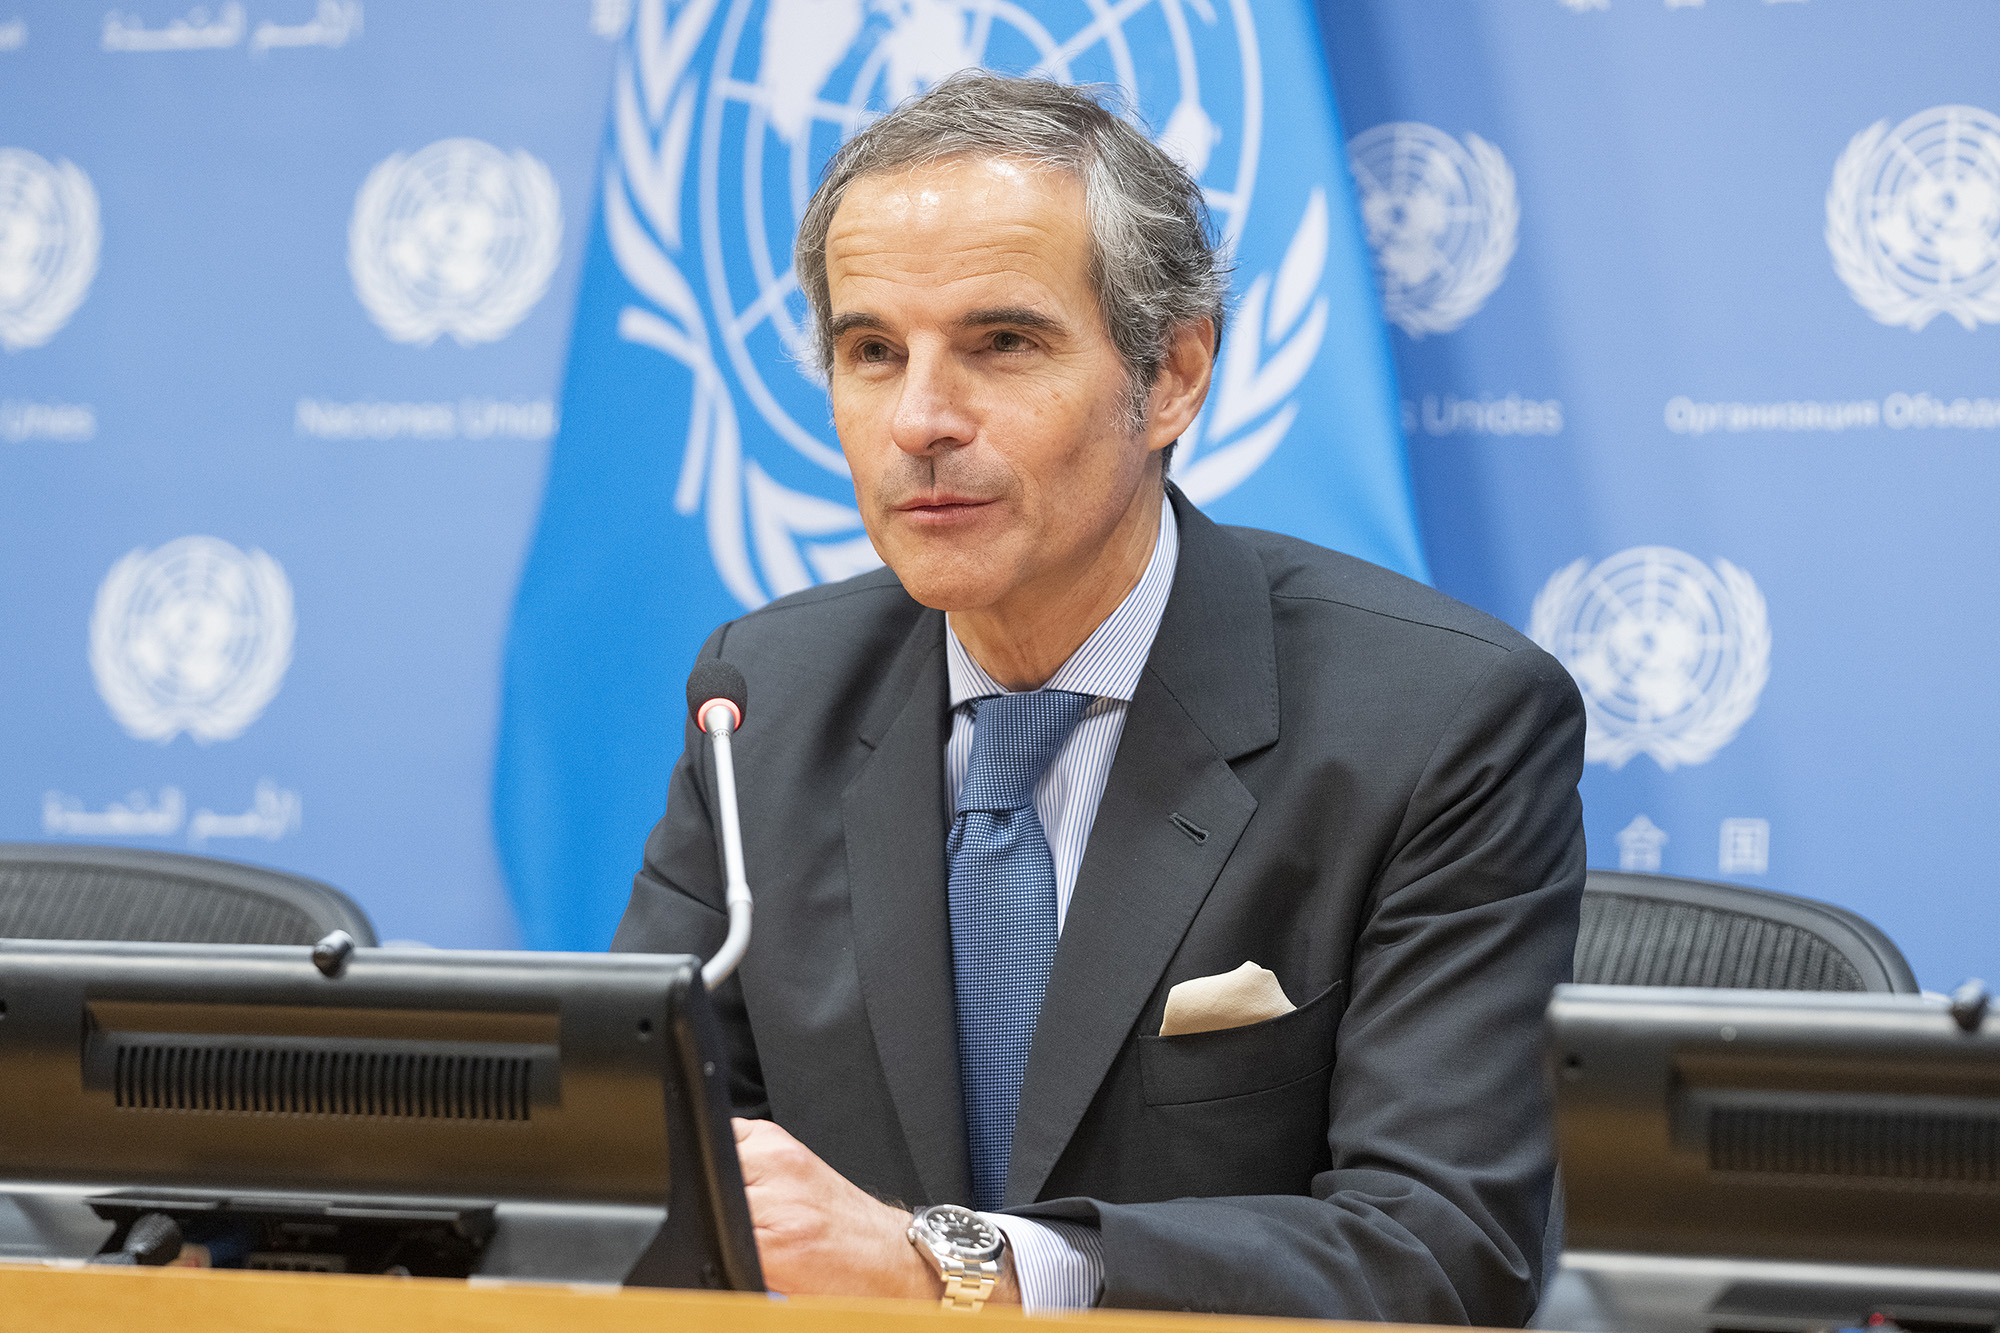 Director General of IAEA (International Atomic Energy Agency) Rafael Mariano Grossi press briefing at UN Headquarters in New York, U.S, on August 2.